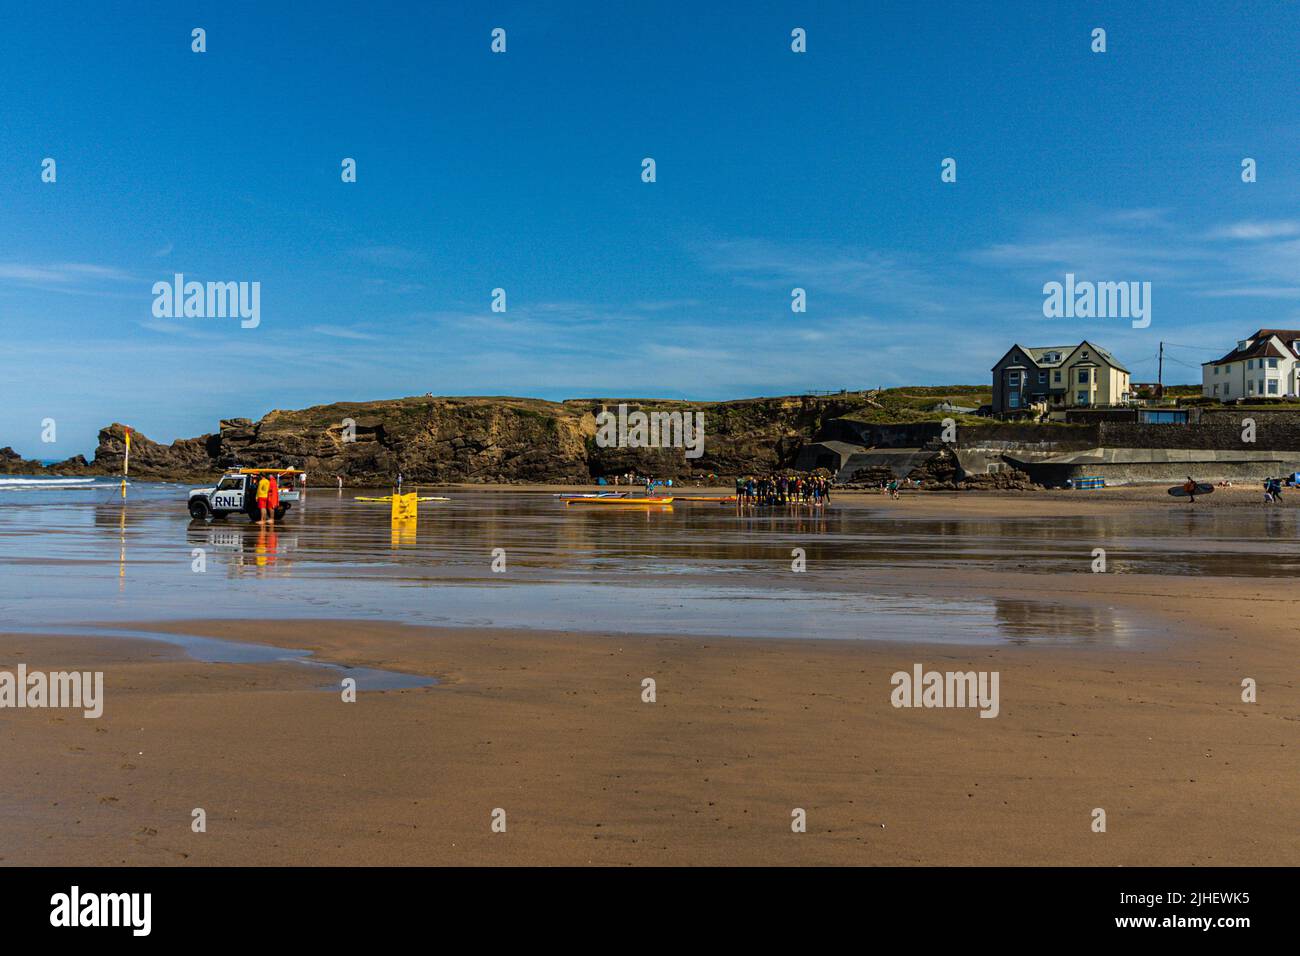 lifeguards at Cooklets Beach at the north end of Bude Cornwall, UK Stock Photo